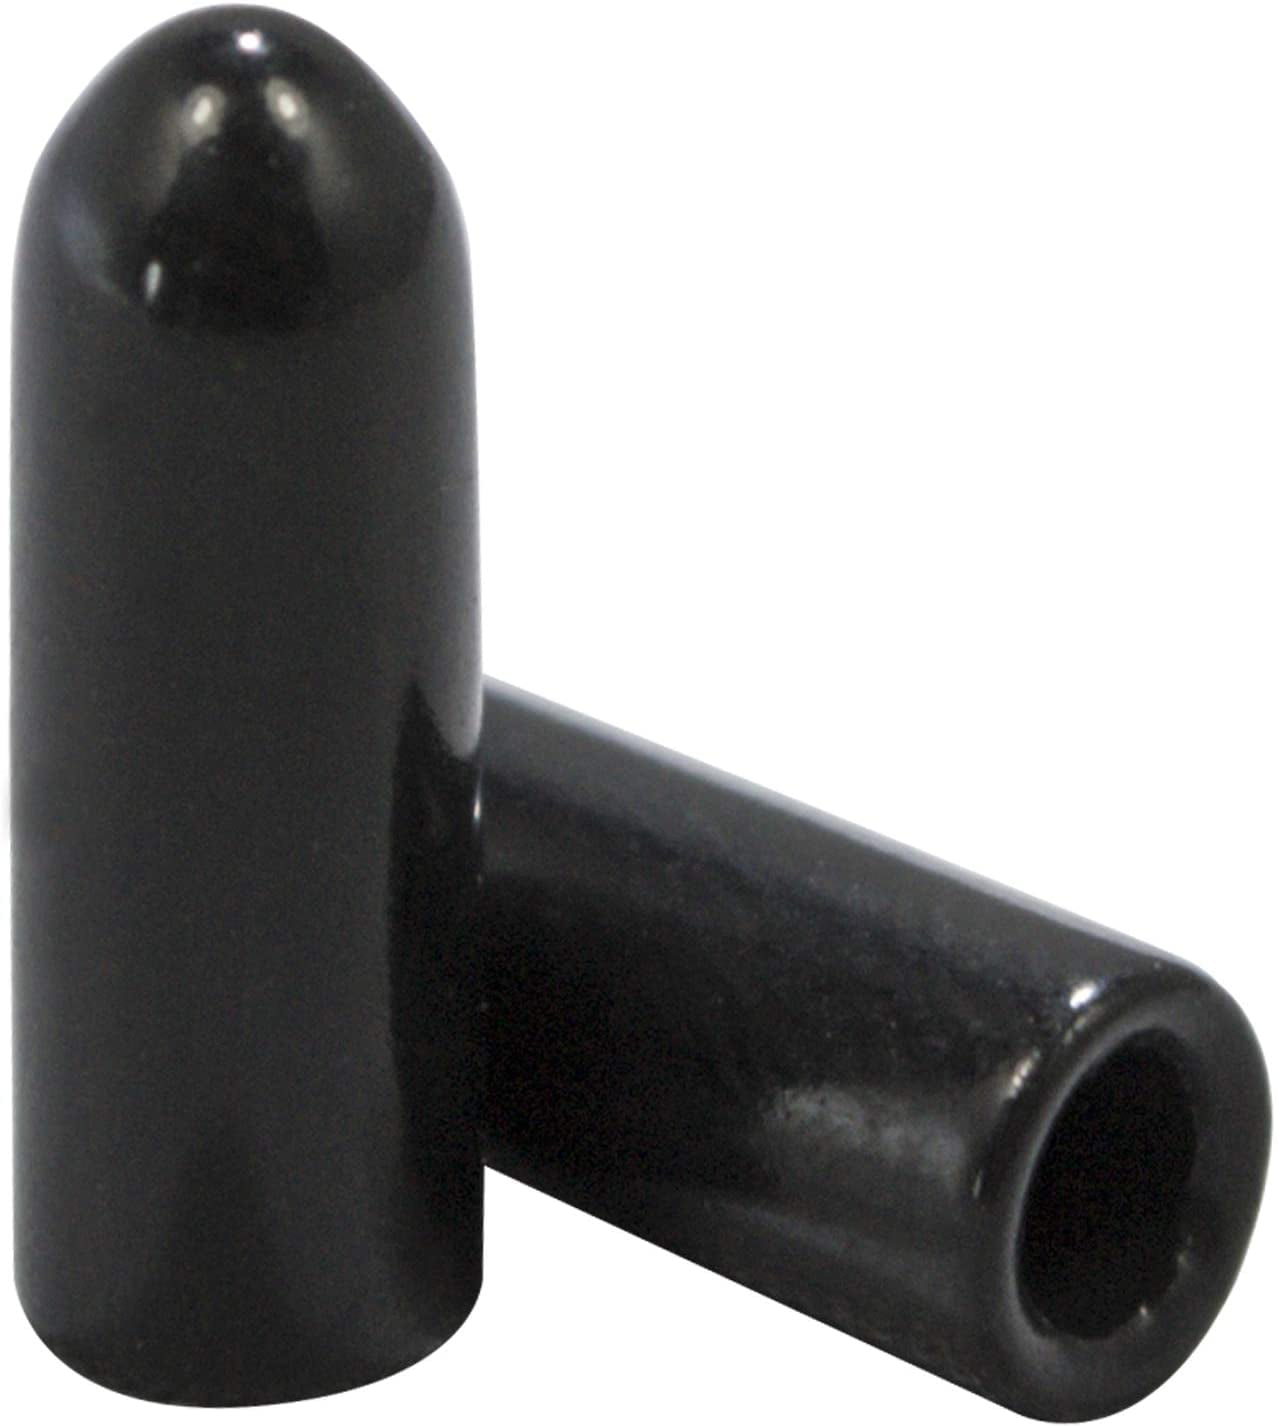 4 Pack 1 1/2" Black Vinyl Round End Cap 1.5 Rubber Cover Pipe Tubing Stopper 